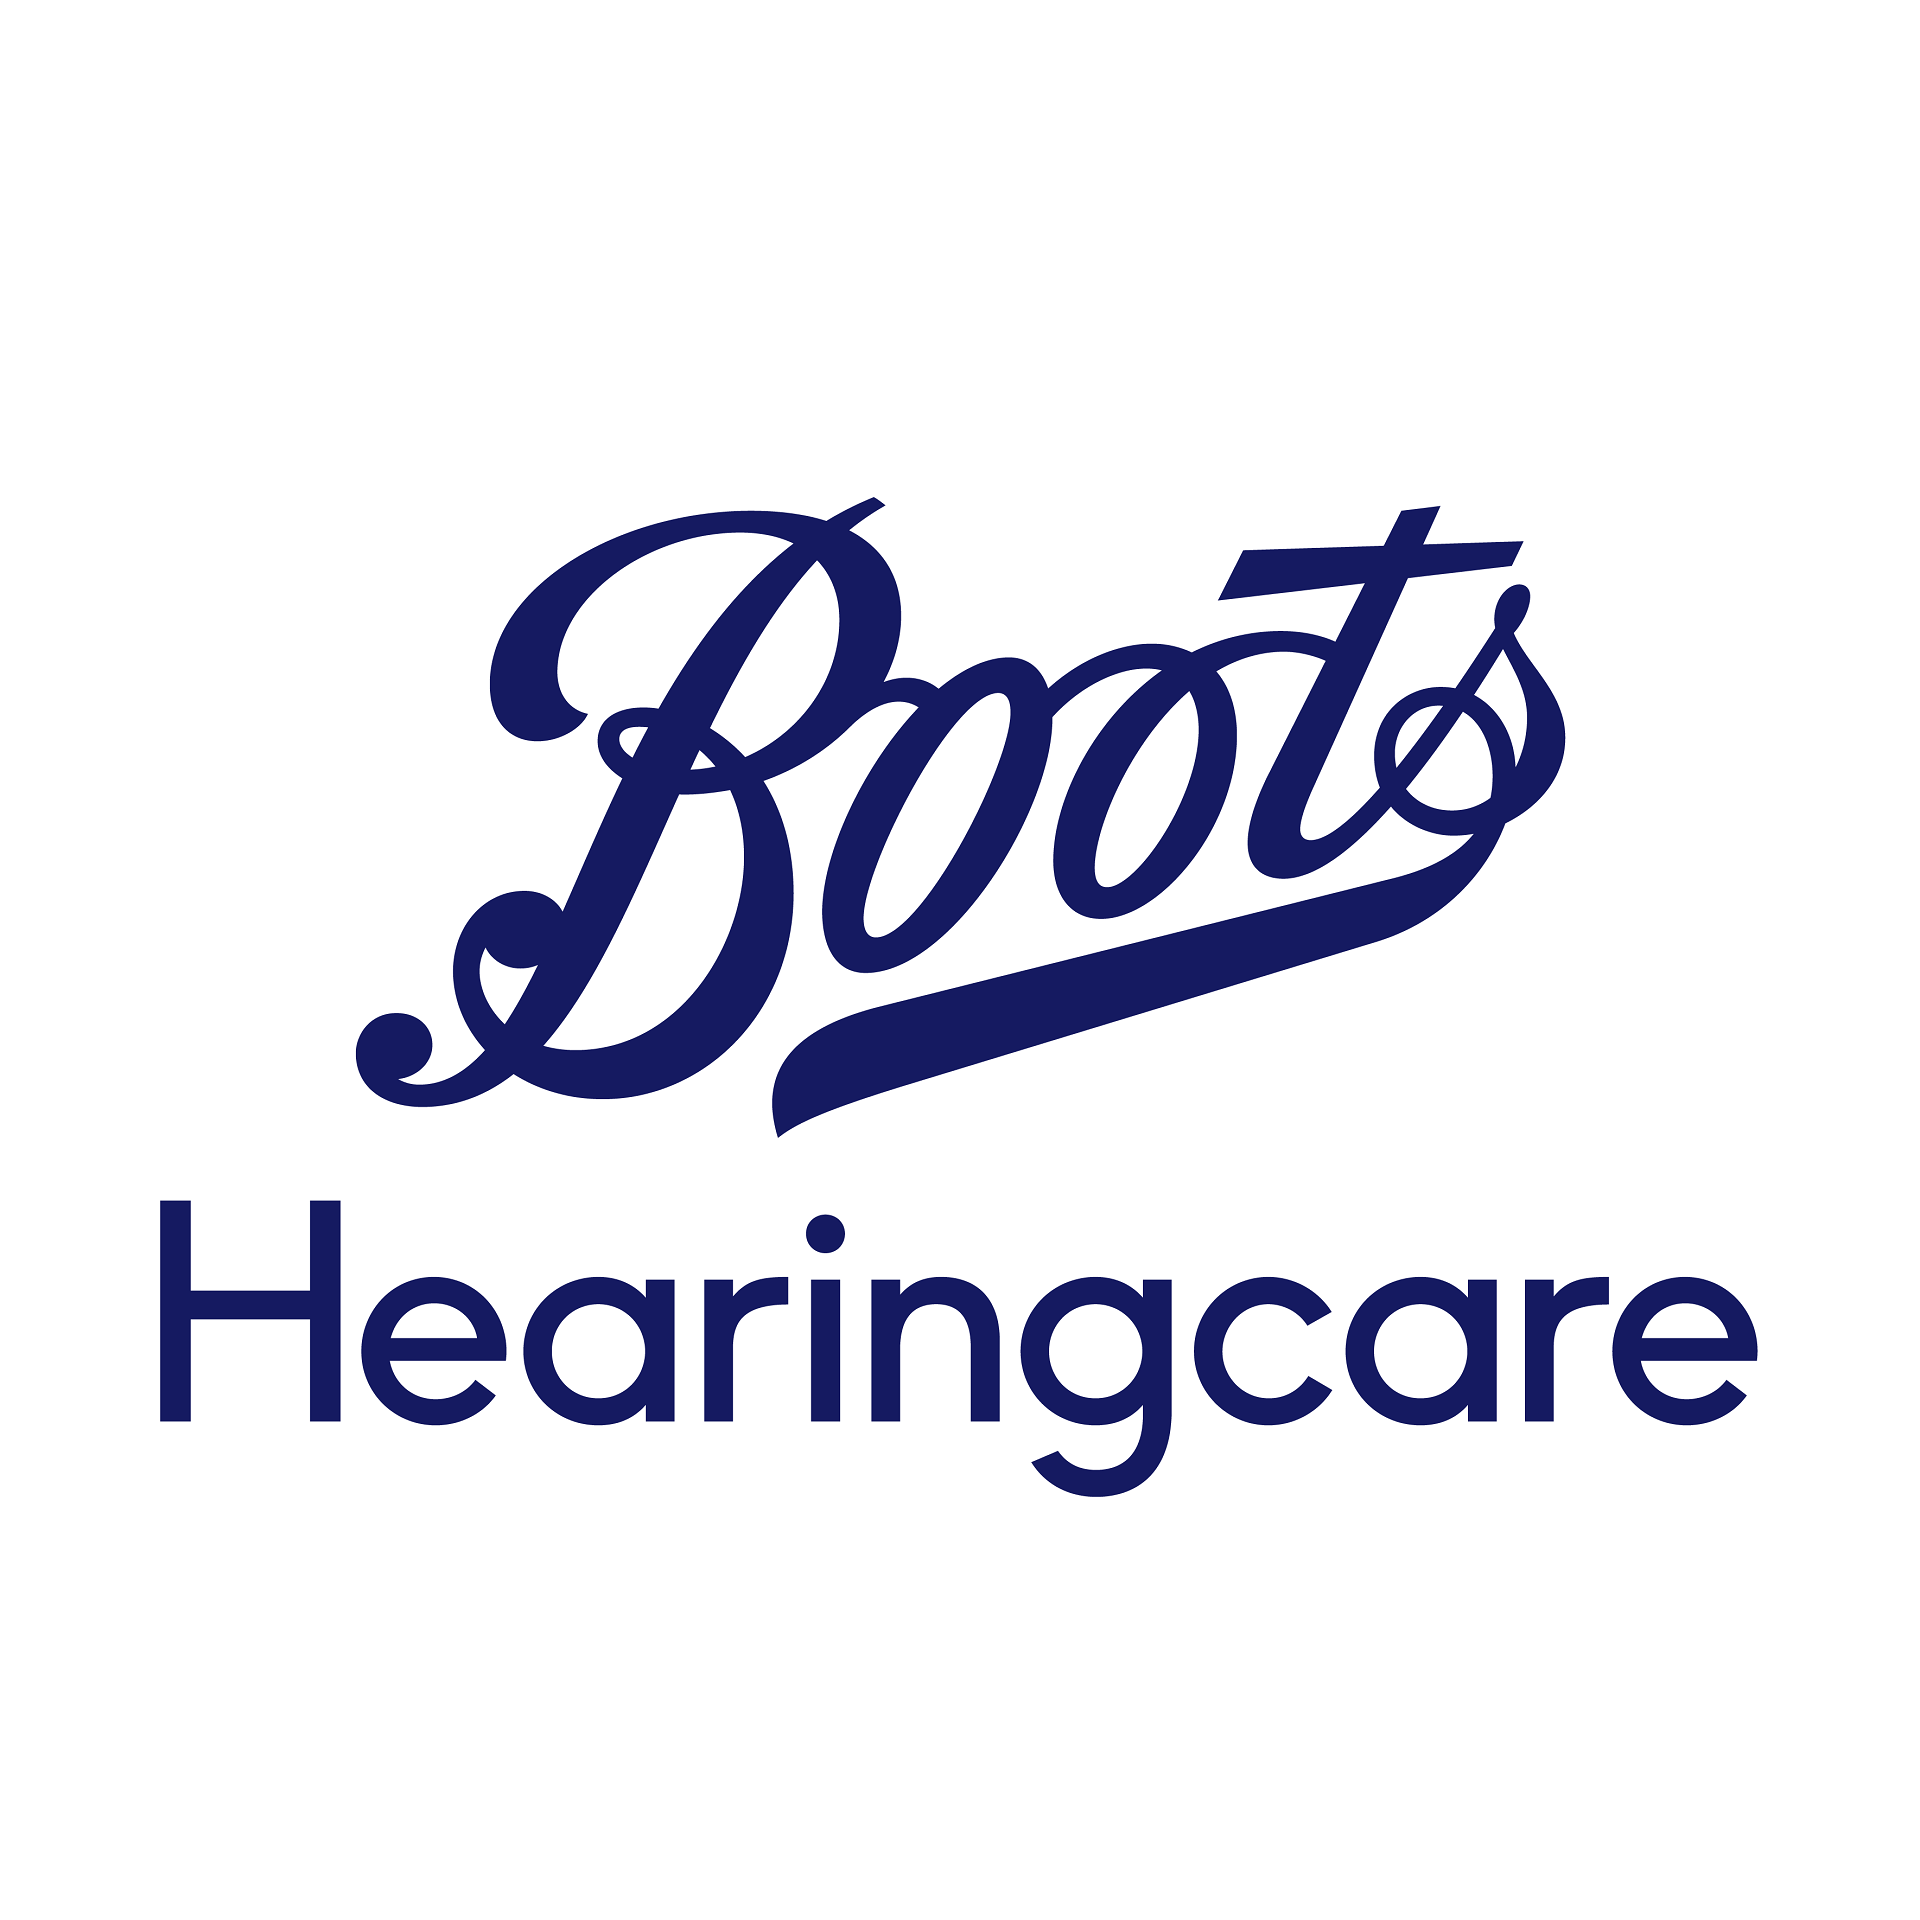 Boots Hearingcare Doncaster French Gate - Doncaster, South Yorkshire DN1 1QB - 03452 701600 | ShowMeLocal.com